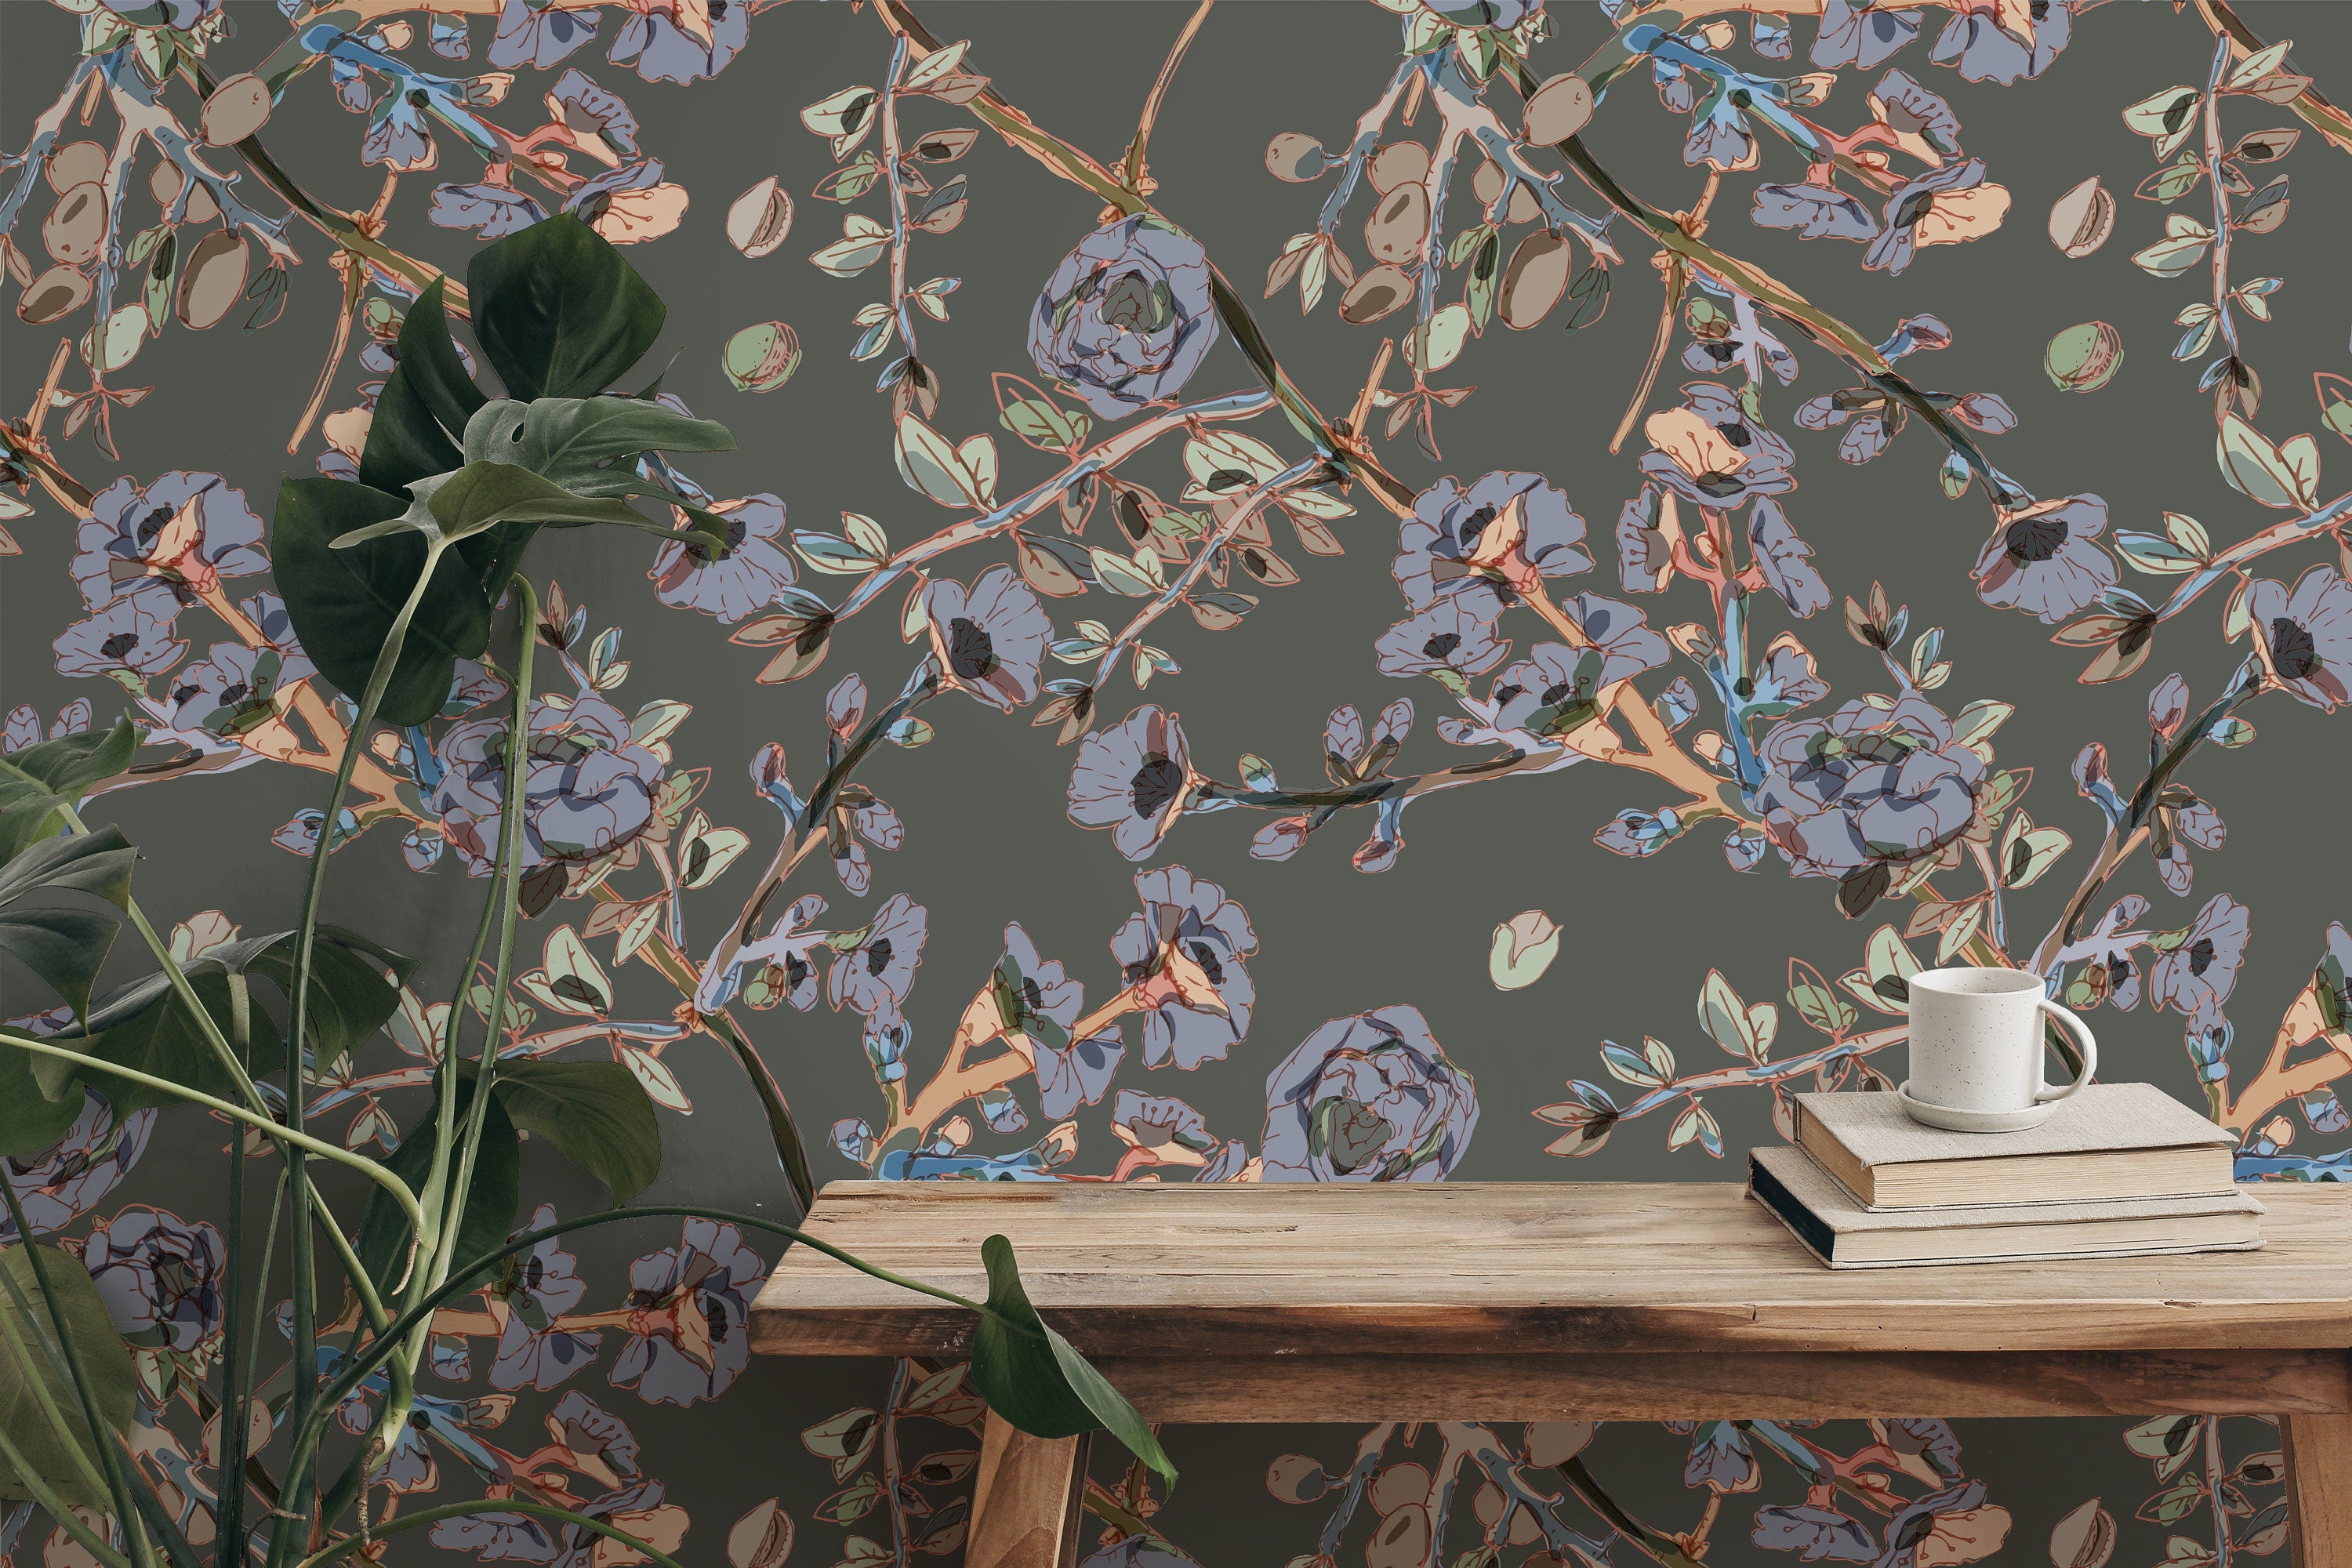 Removable Wallpaper Gray Floral Branch Wallpaper | Peel And Stick Wallpaper | Adhesive Wallpaper | Wall Paper Peel Stick Wall Mural 3495 - JamesAndColors